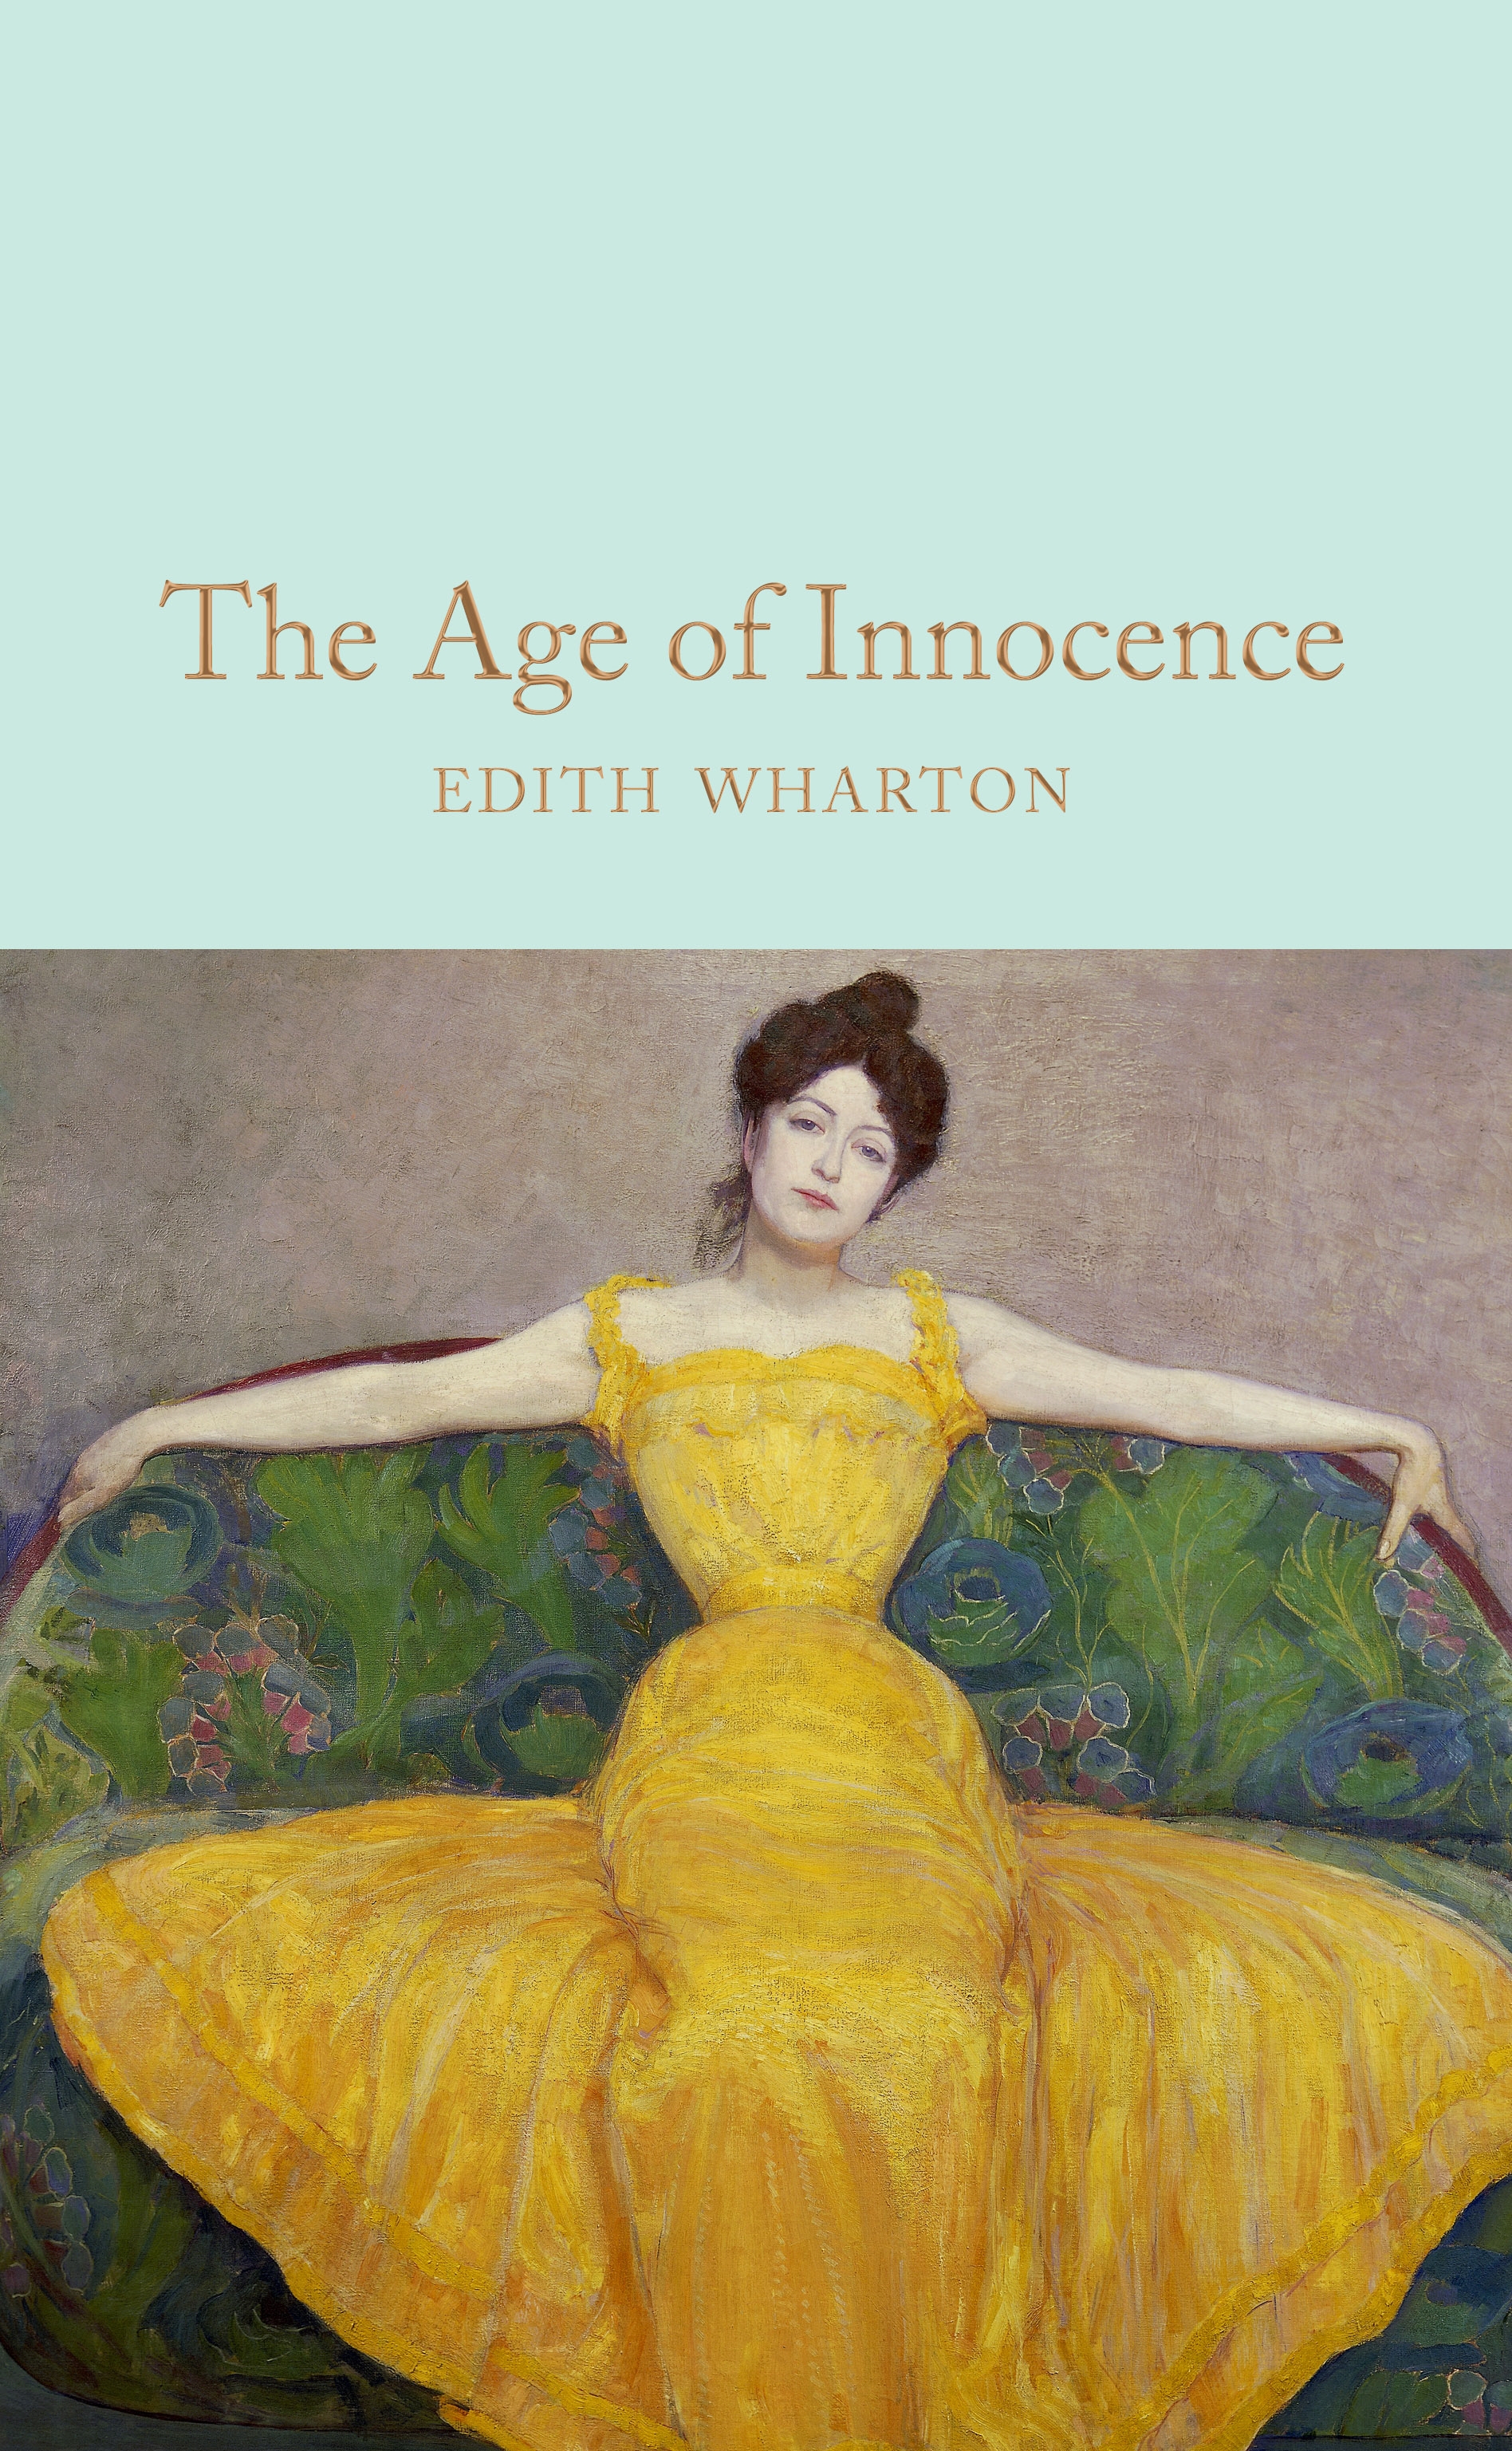 Book “The Age of Innocence” by Edith Wharton — May 7, 2019